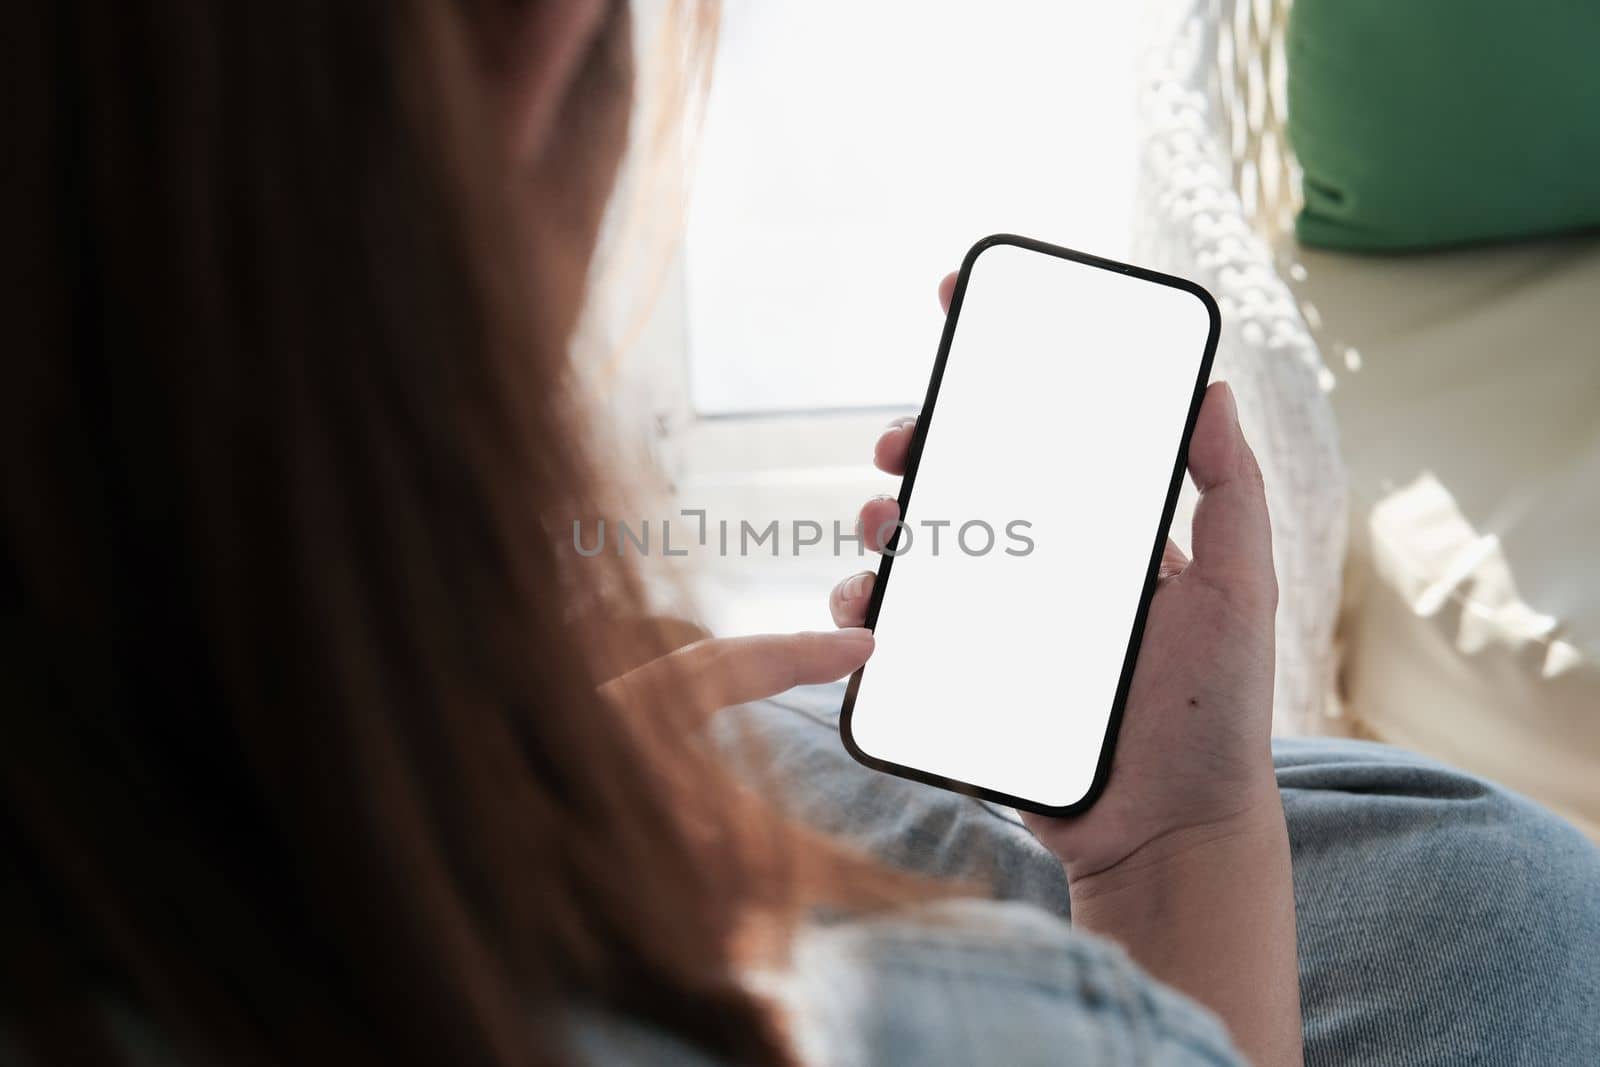 Mock up phone in woman hand showing white screen. Mobile phone white screen is blank the background is blurred by nateemee